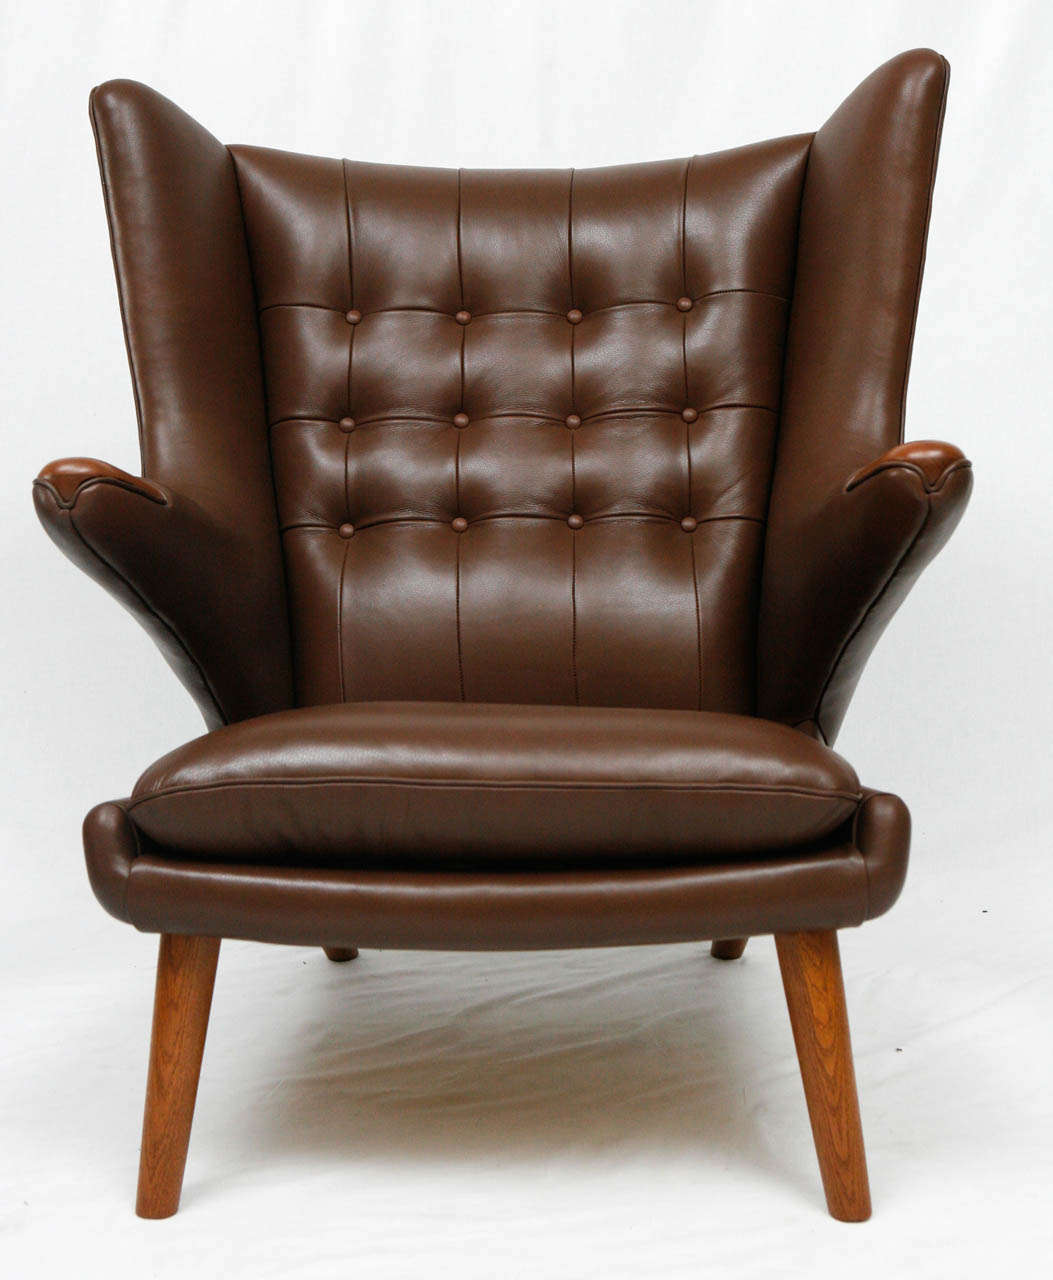 Hans Wegner papa bear chair produced by AP Stolen.    Store formerly known as ARTFUL DODGER INC